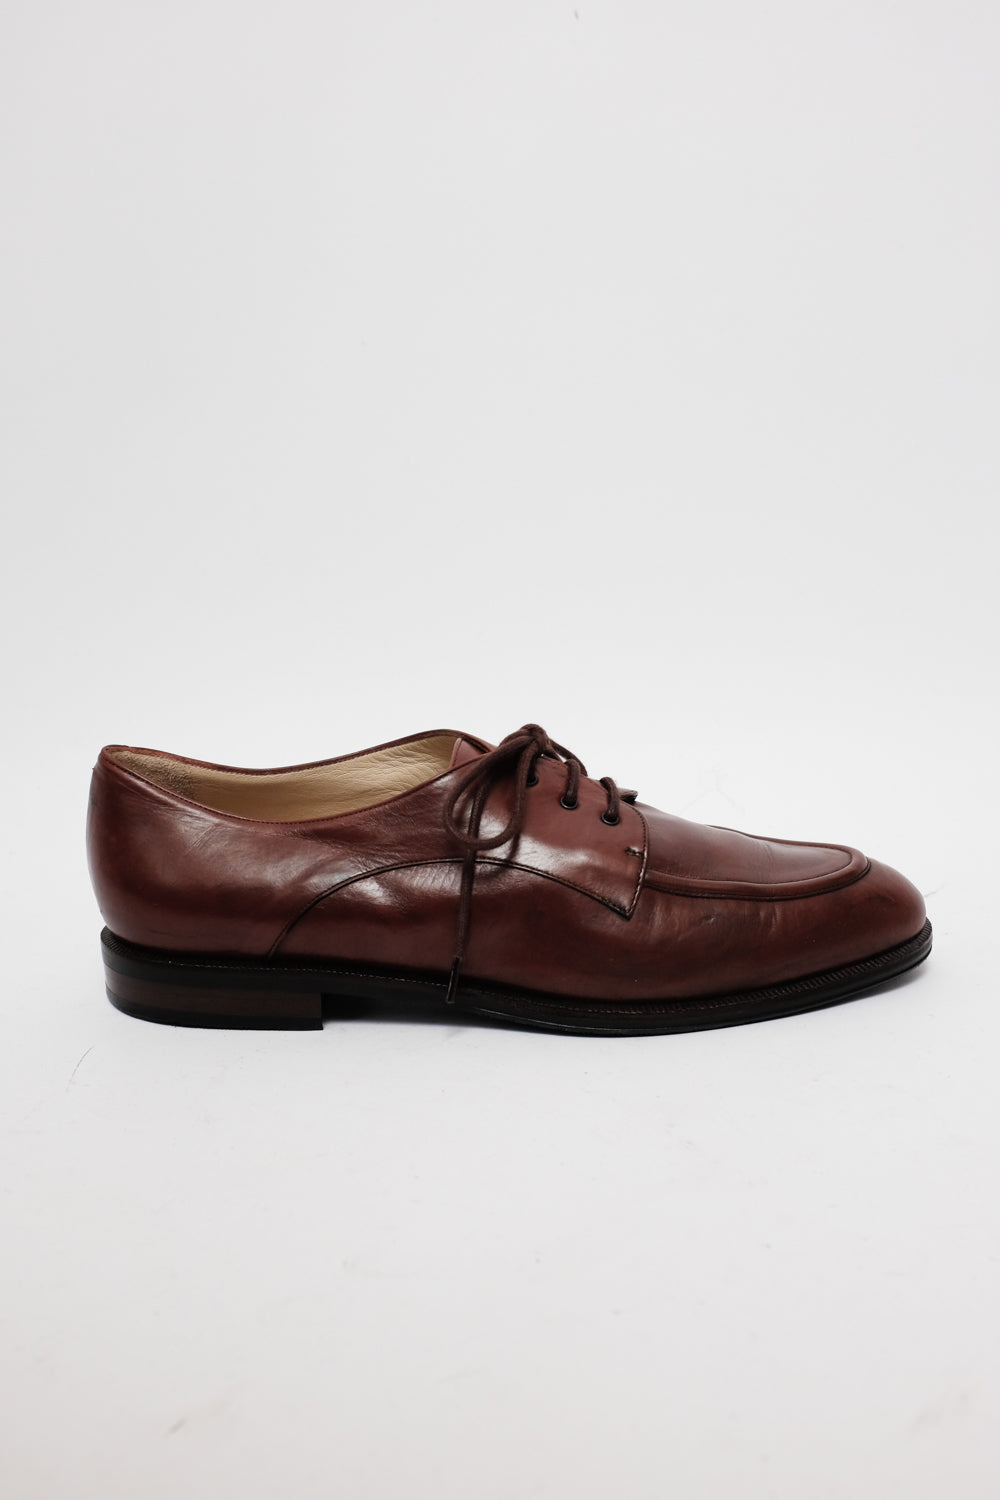 ITALY BROWN LEATHER LACE UP BROGUES 39,5